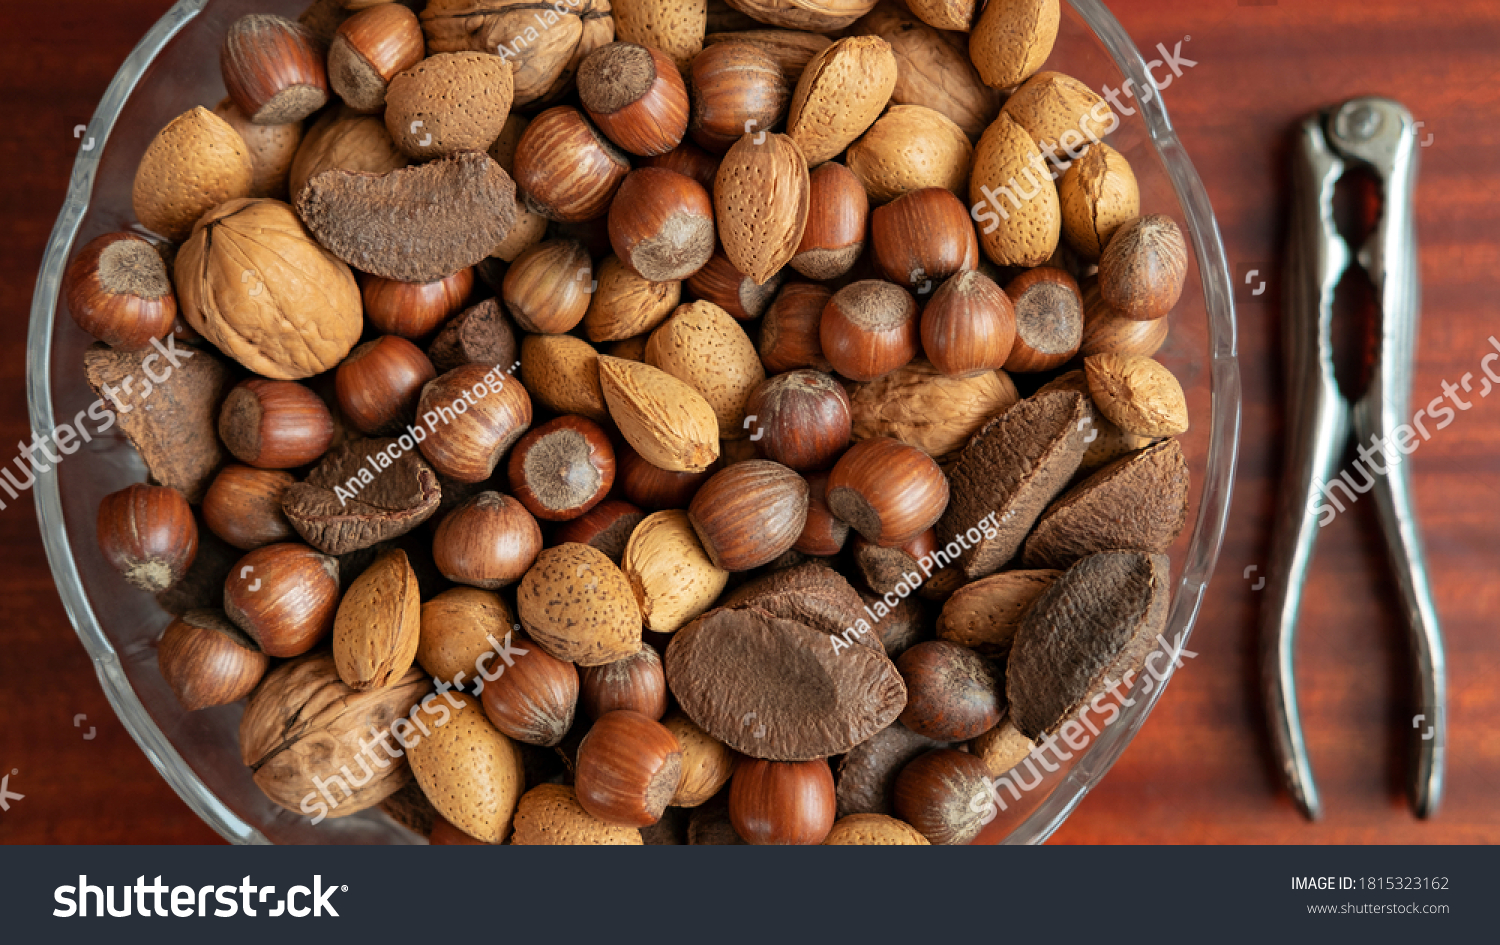 Assortment of whole nuts, walnuts, almonds, hazelnuts and Brazil nuts in a bowl with a nut cracker on a side, nutritious snack cracked and eaten in autumn or winter months as a special holidays treat. #1815323162